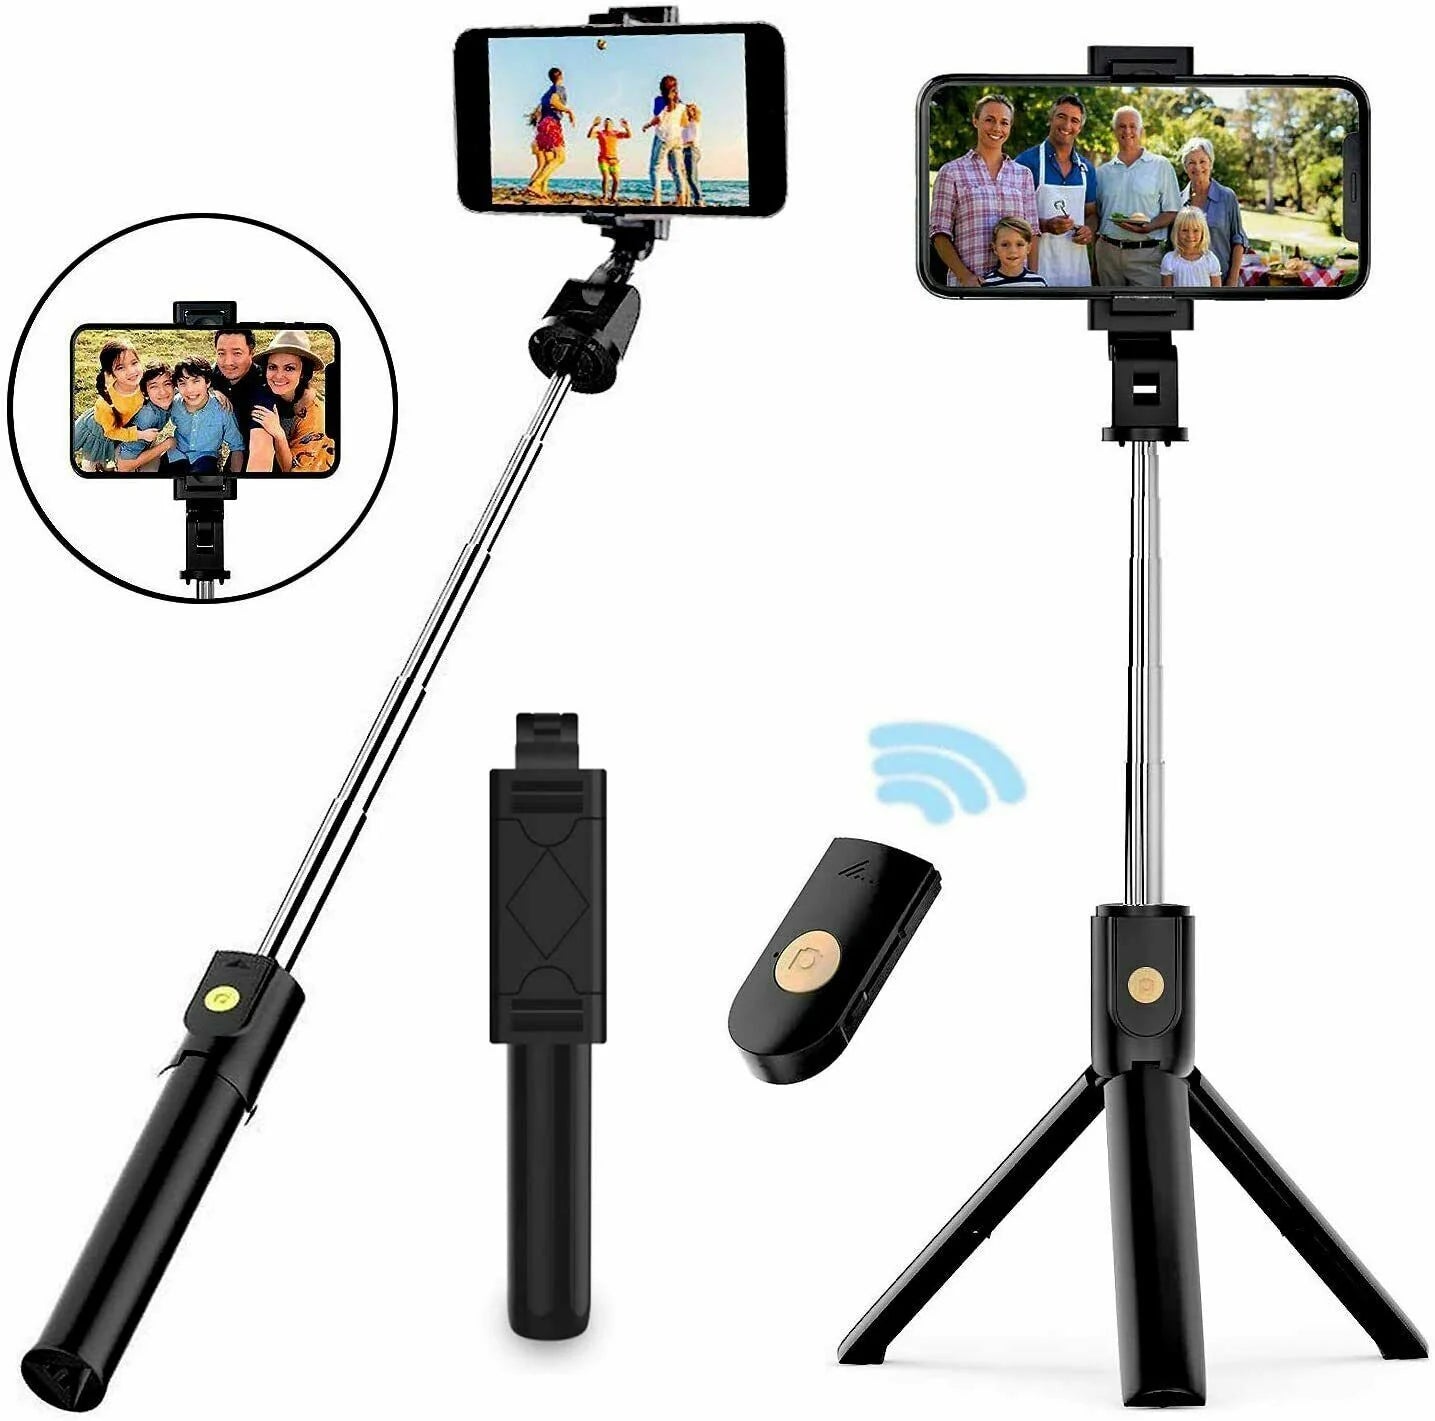 Cell Phone Holder with Selfie Stick, Tripod, and Remote Control